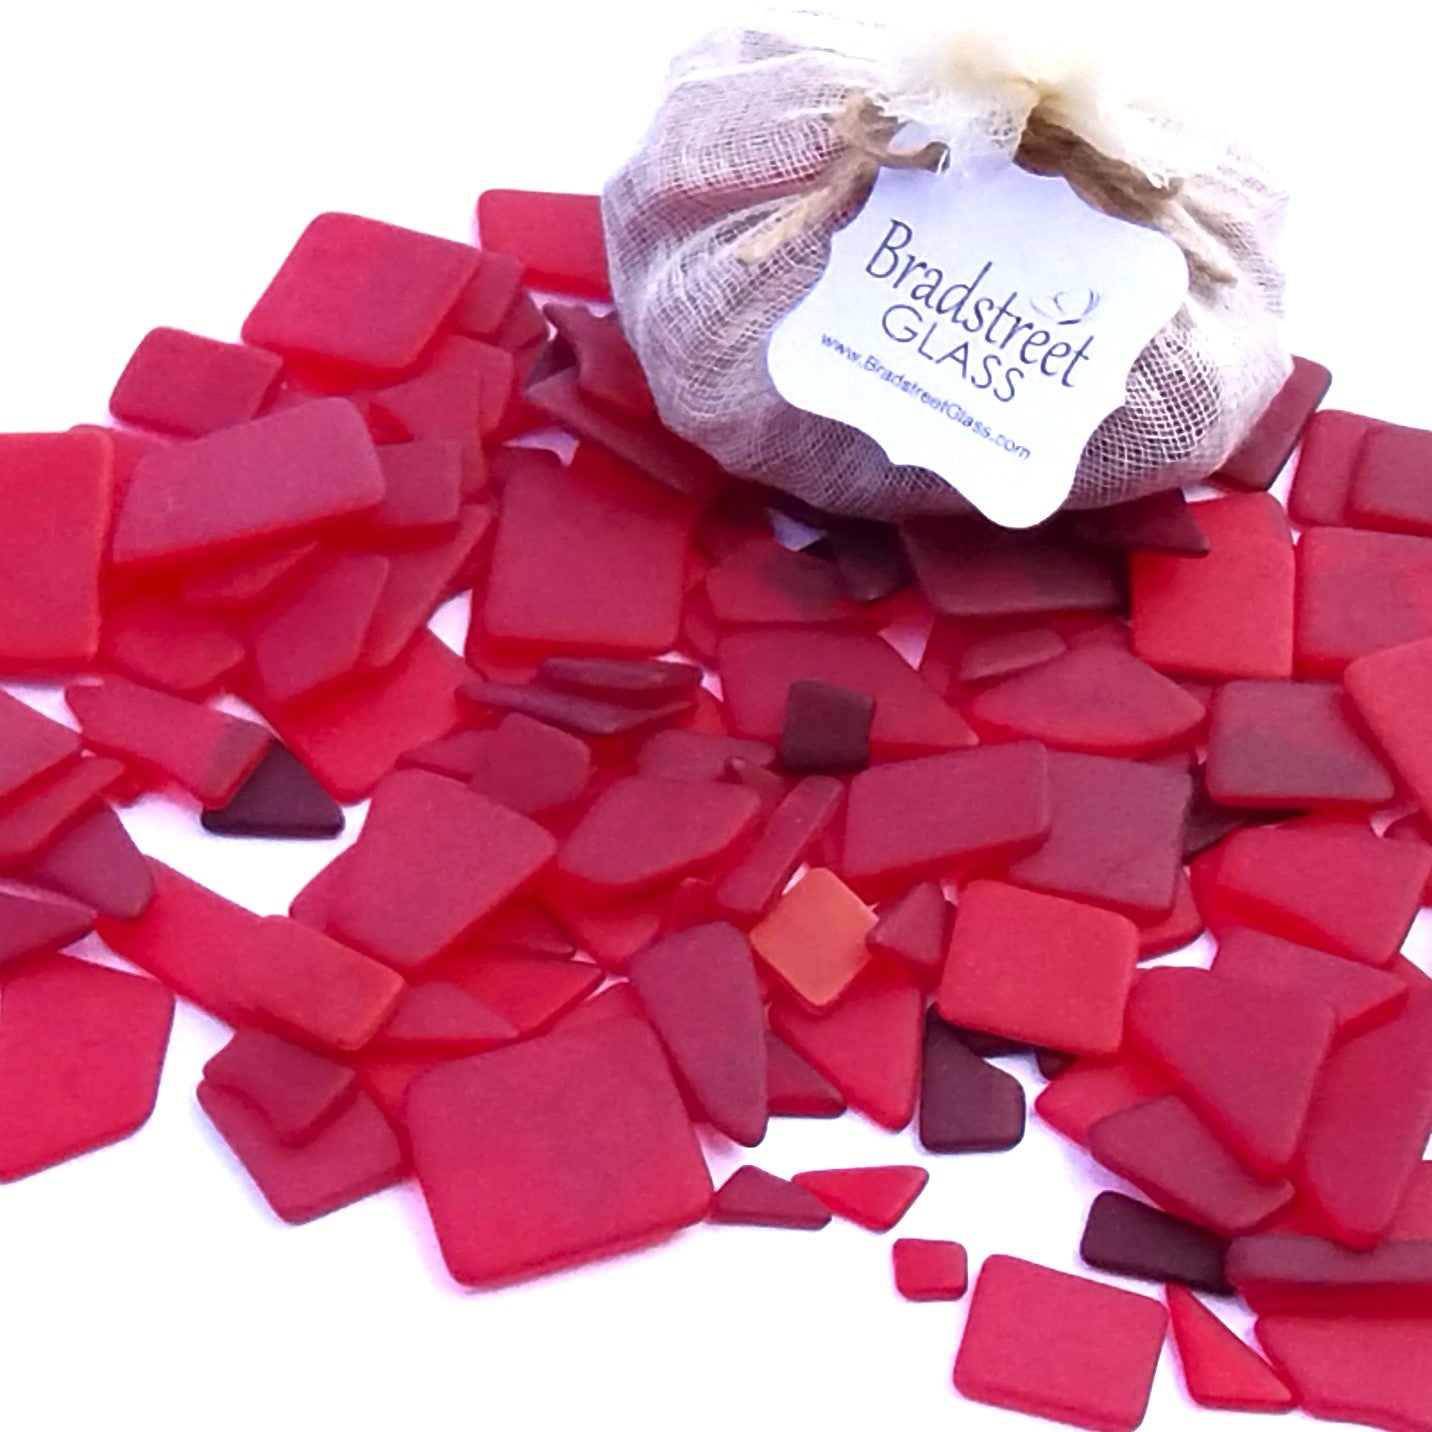 Bradstreet Glass Red Tumbled Stained Glass 1/2 pound "Sea Glass" in Shades of Red